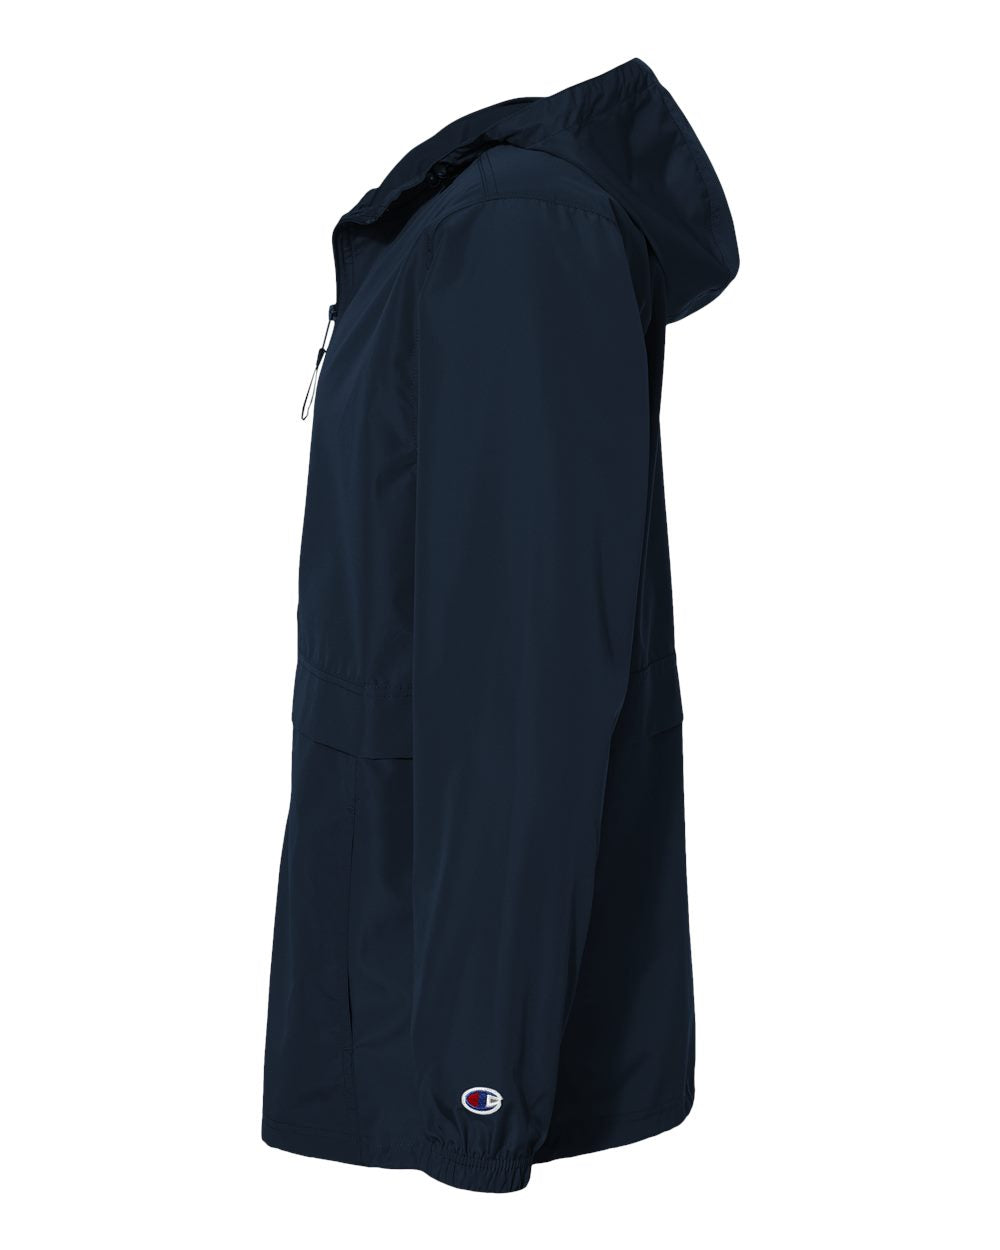 Champion Anorak Jacket CO125 #color_Navy